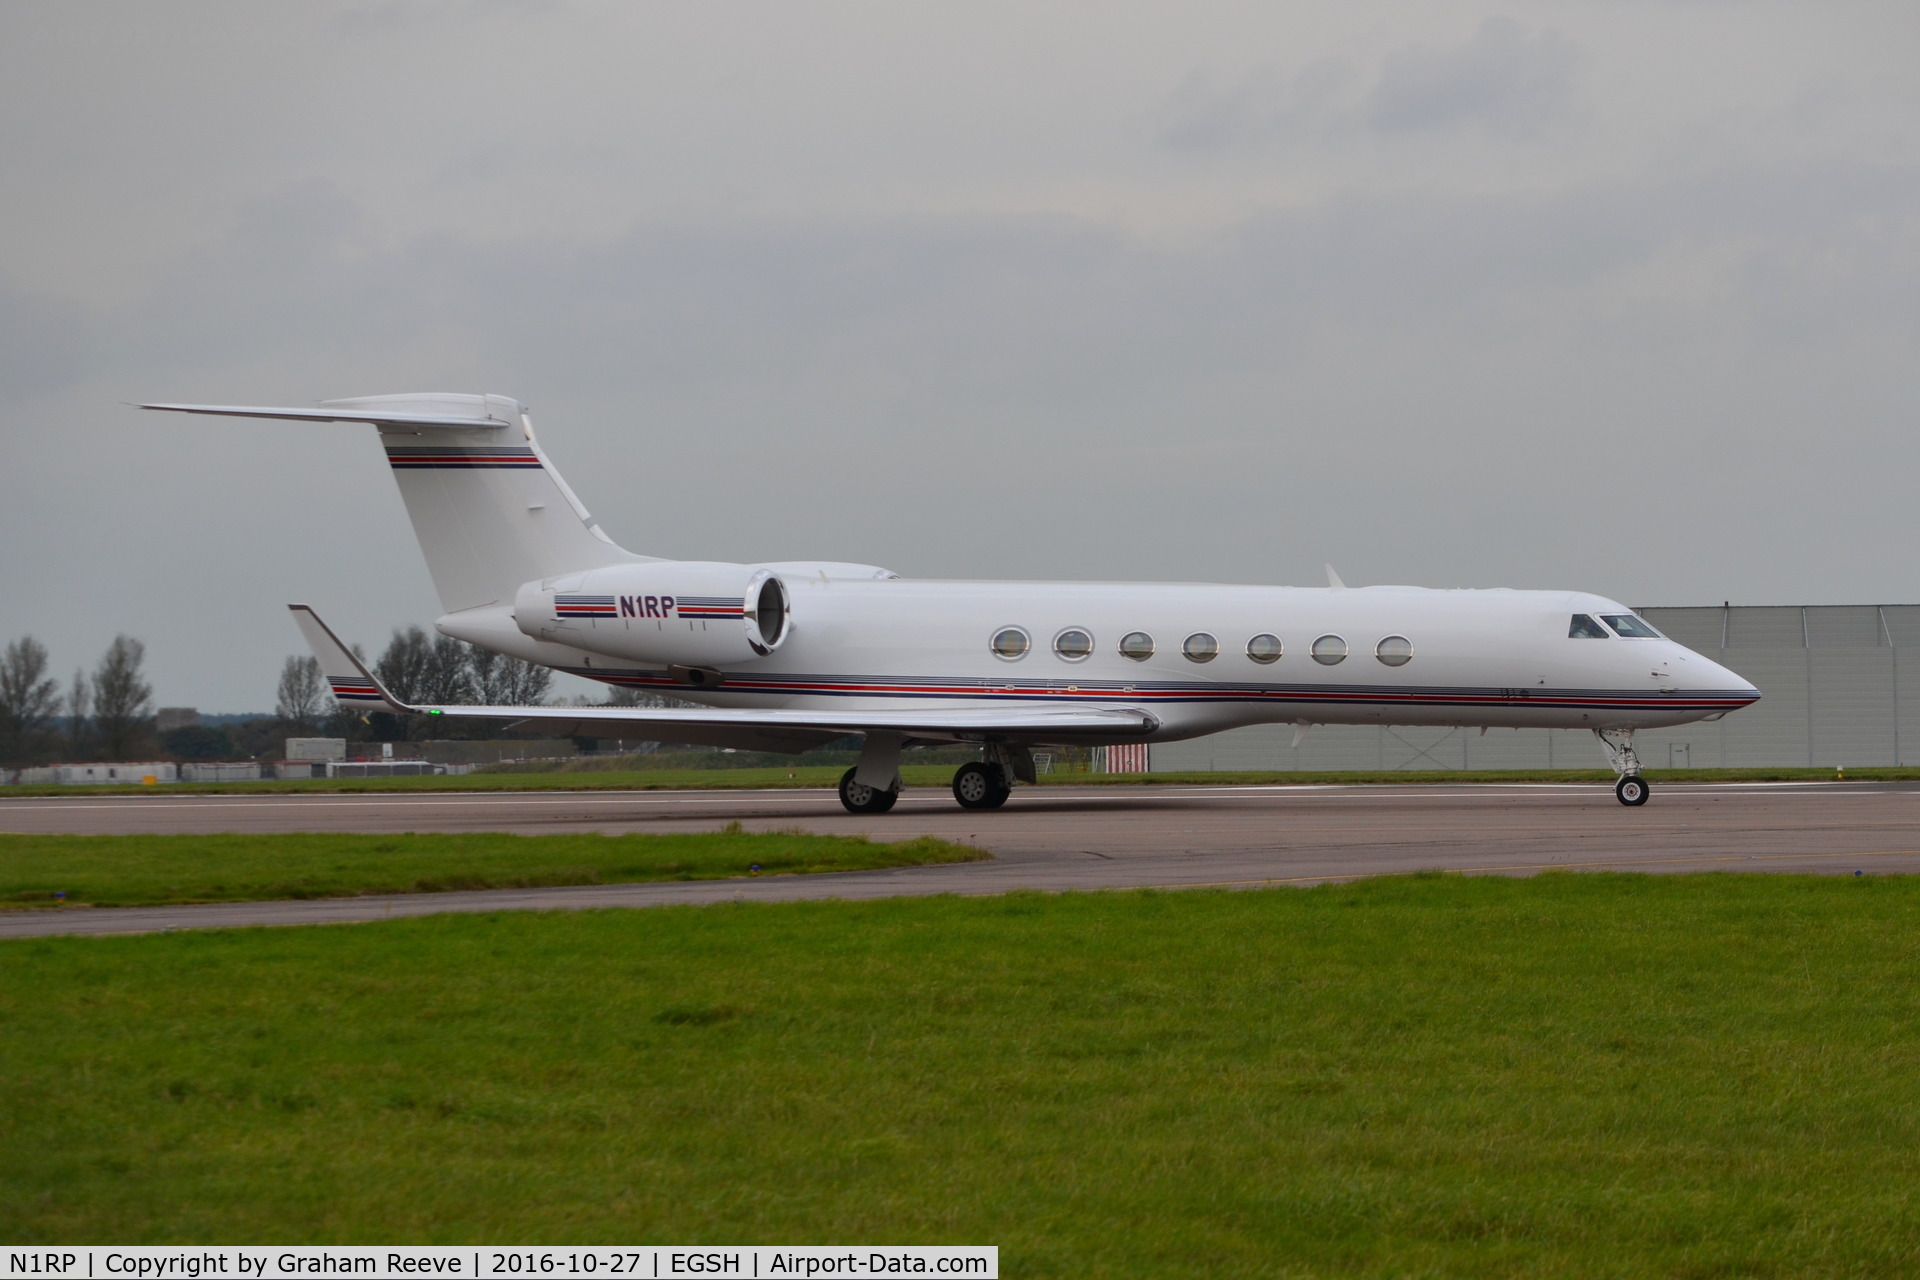 N1RP, 2013 Gulfstream Aerospace V-SP G550 C/N 5458, About to depart from Norwich.